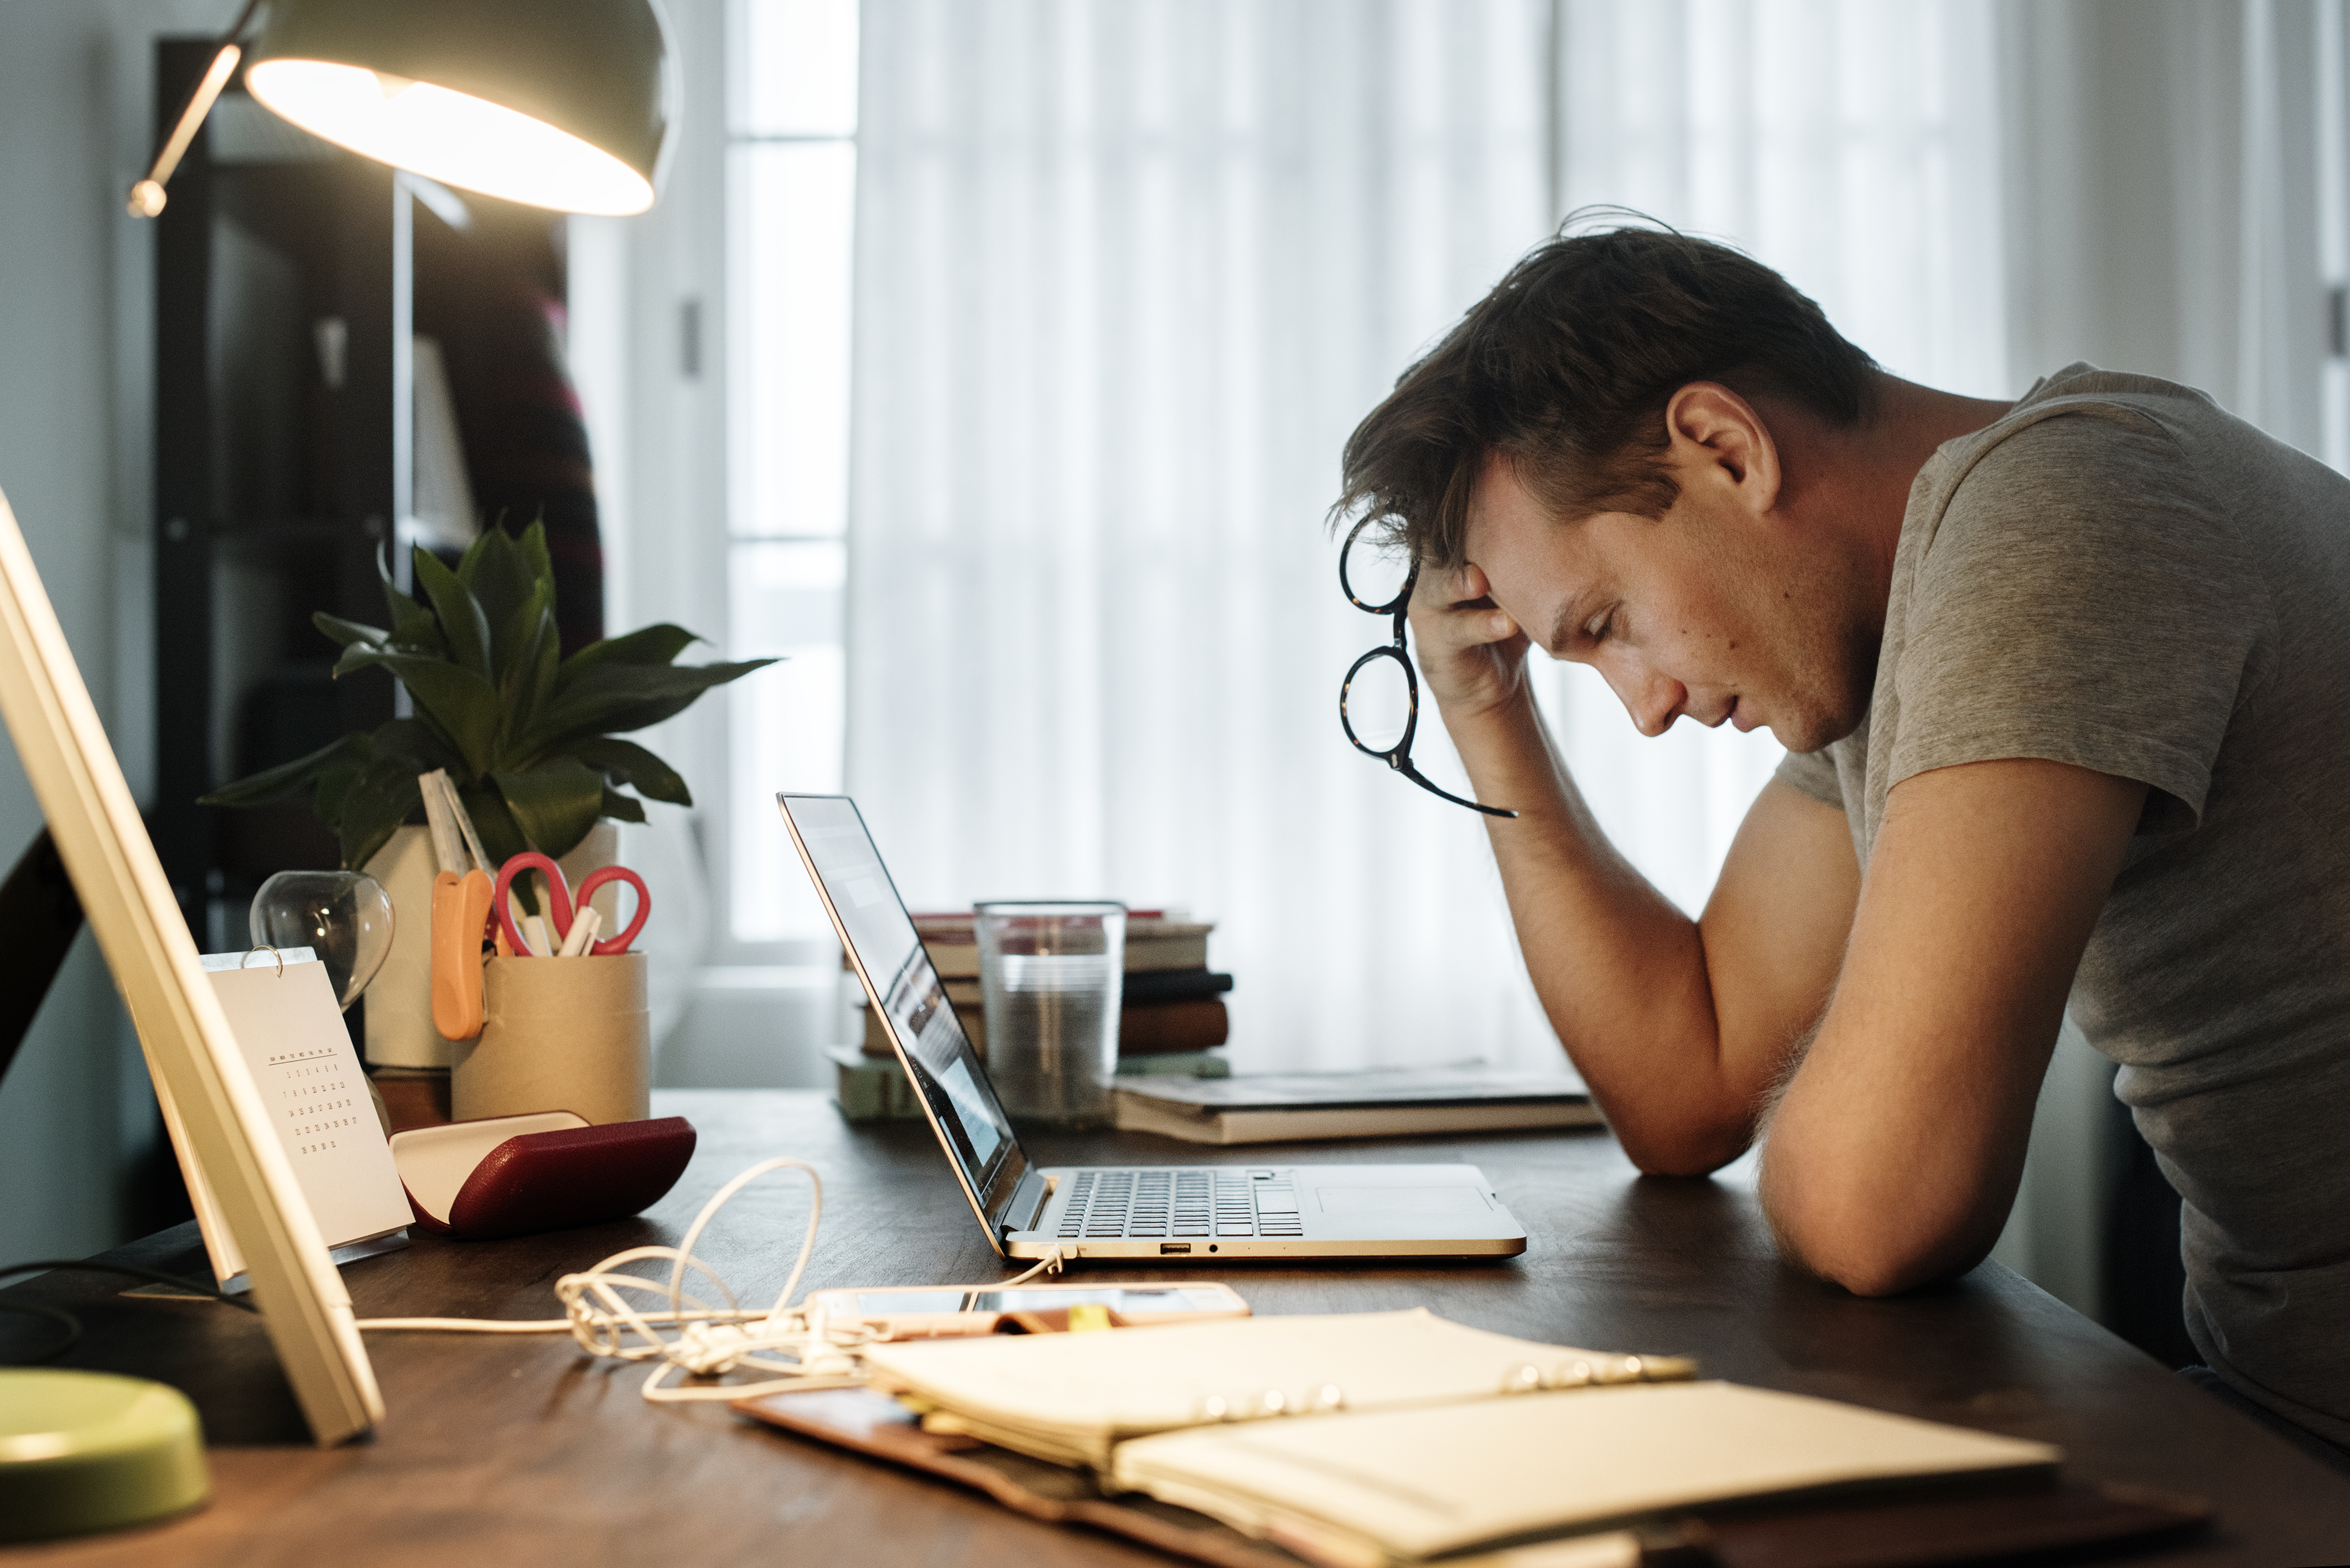 Man stressed while working on laptop | Source: Getty Images